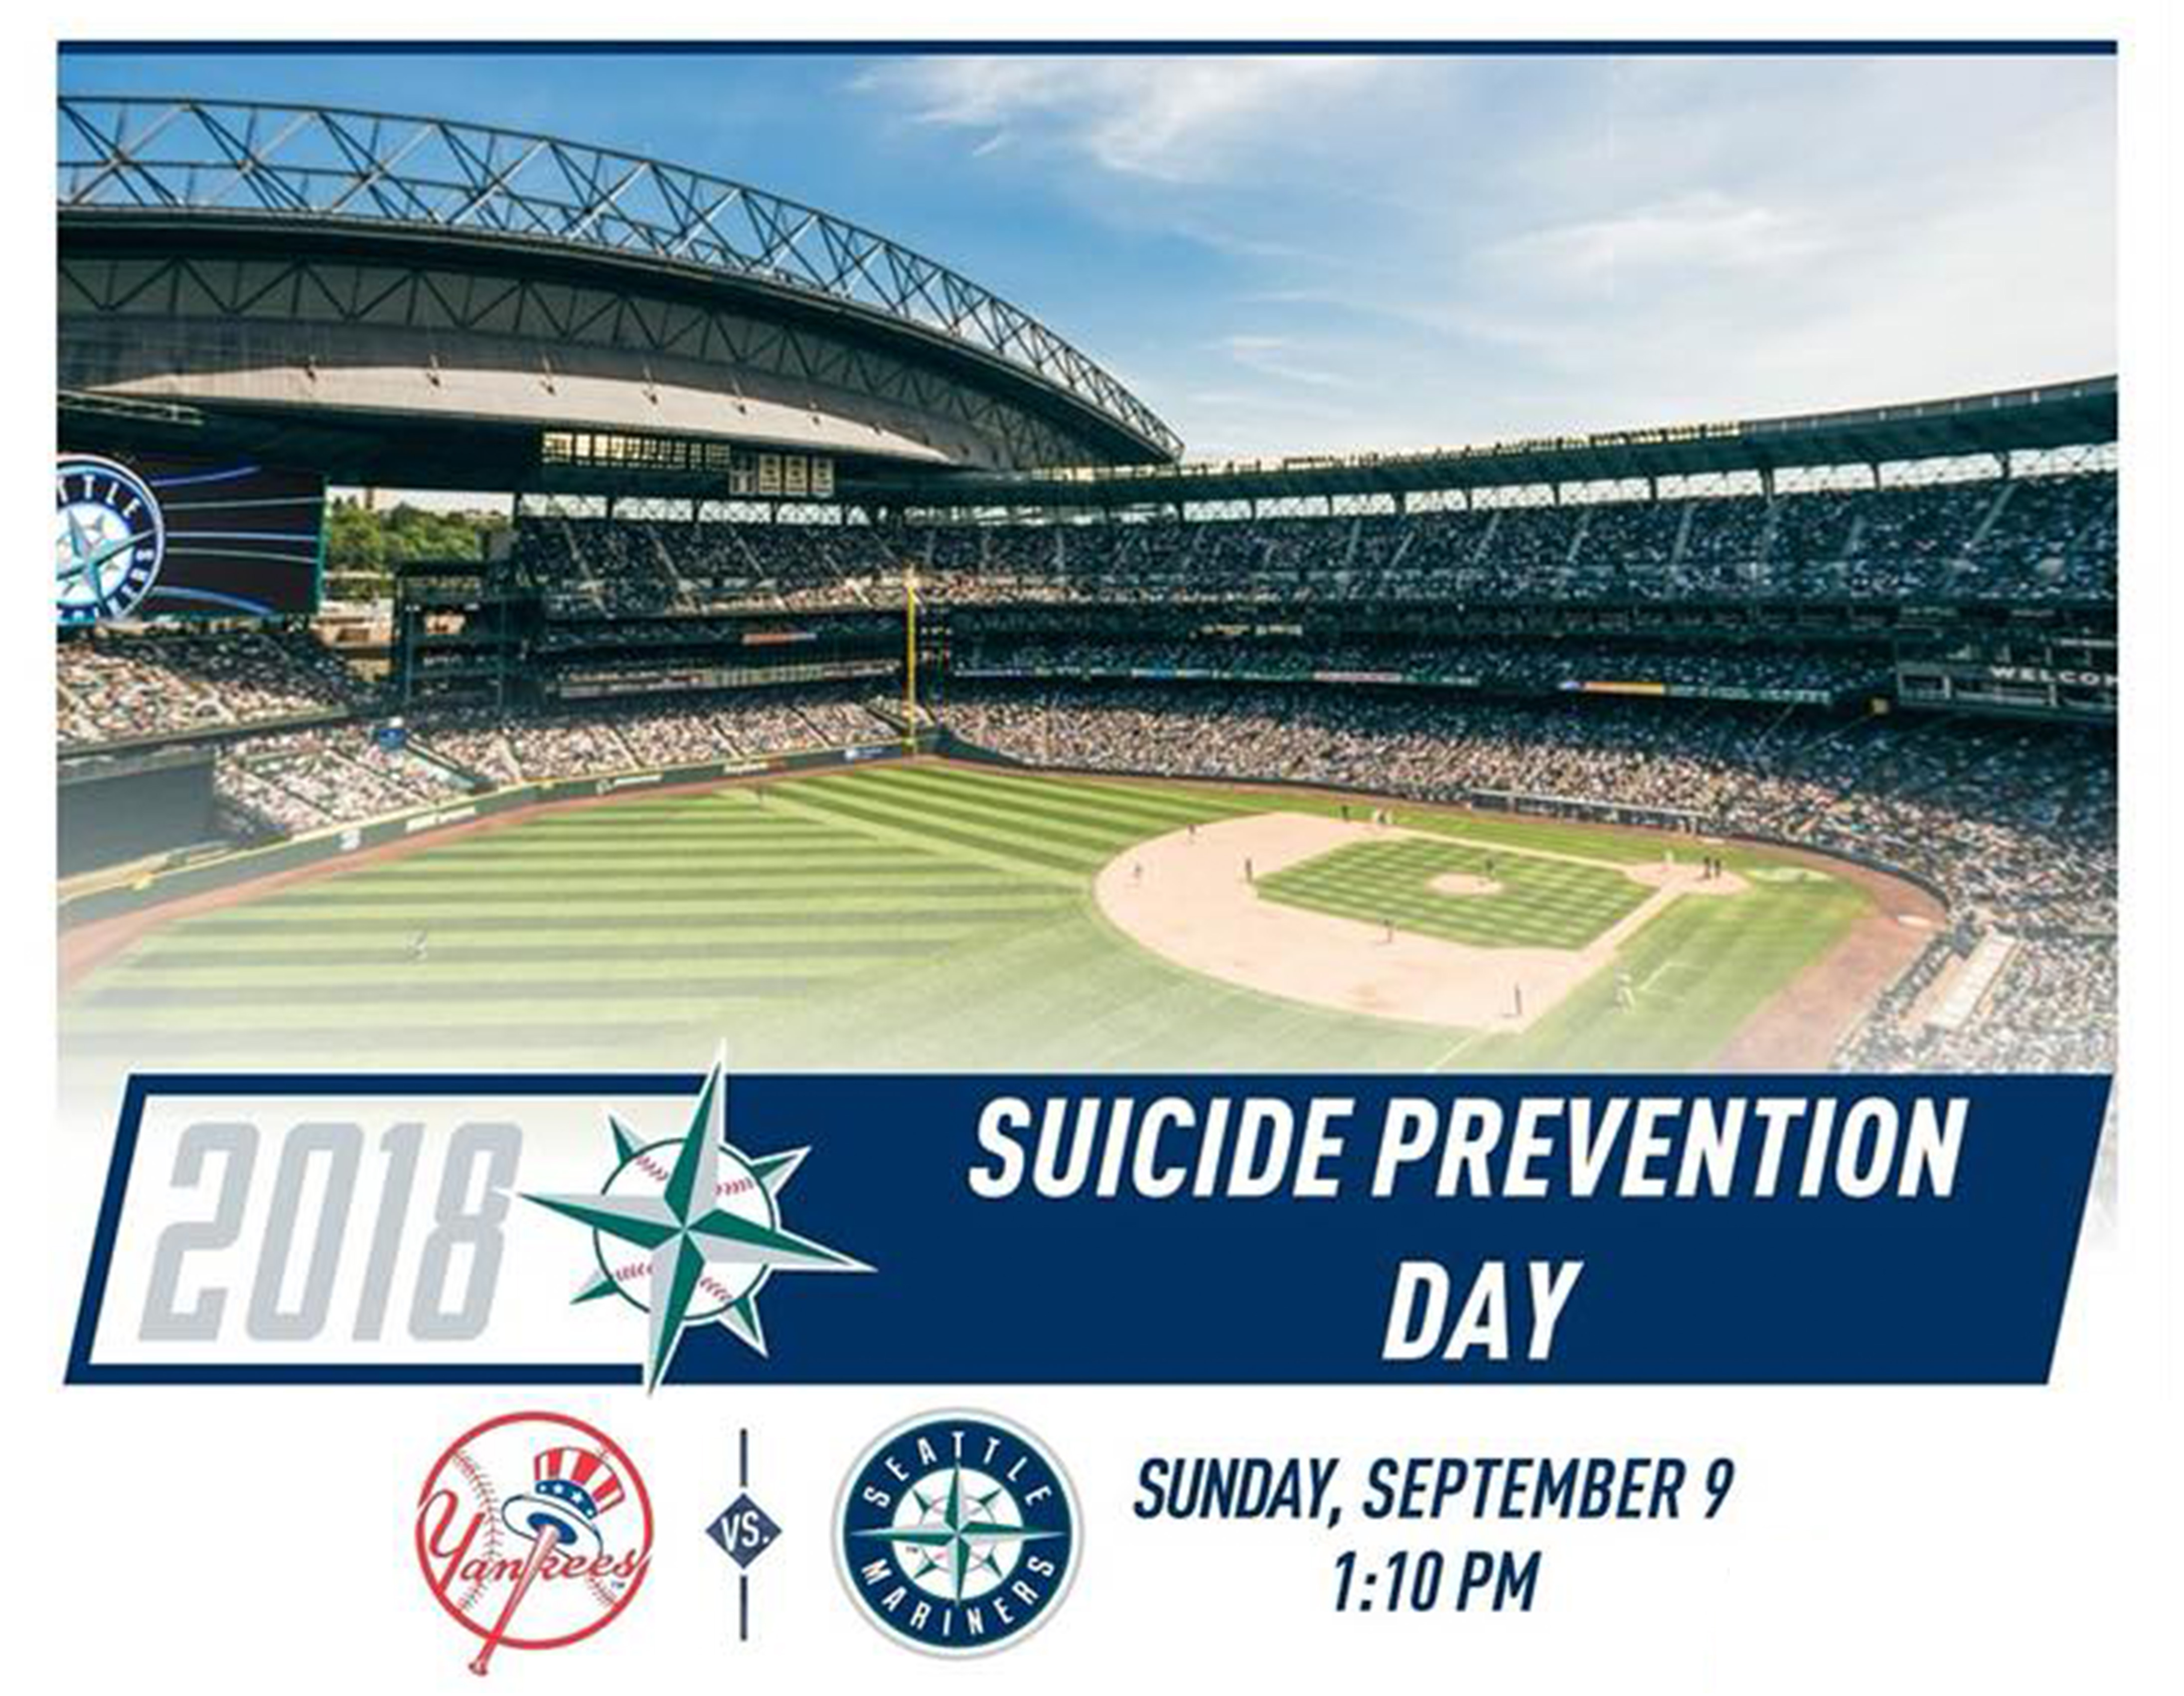 suicide prevention day flyer